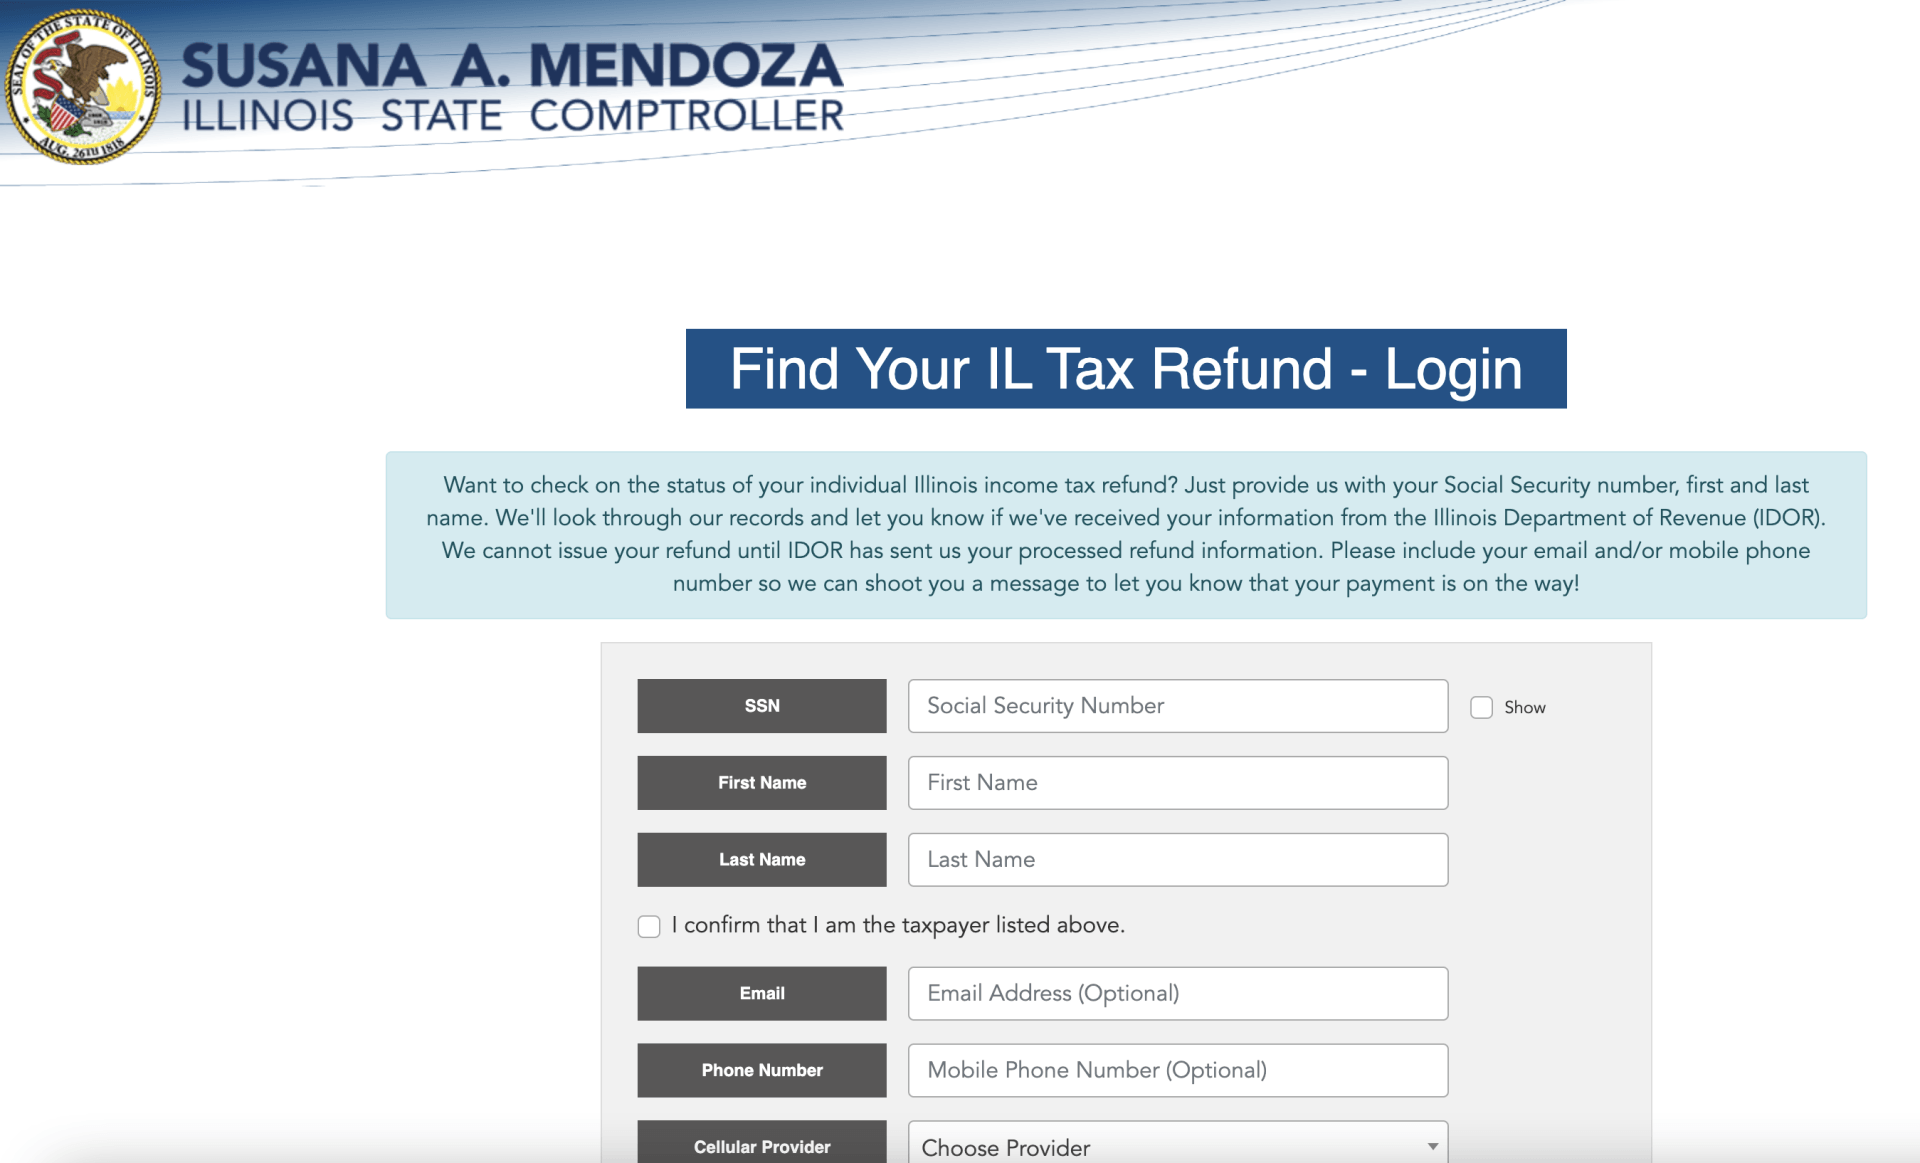 Want to check on the status of your individual Illinois income tax refund?